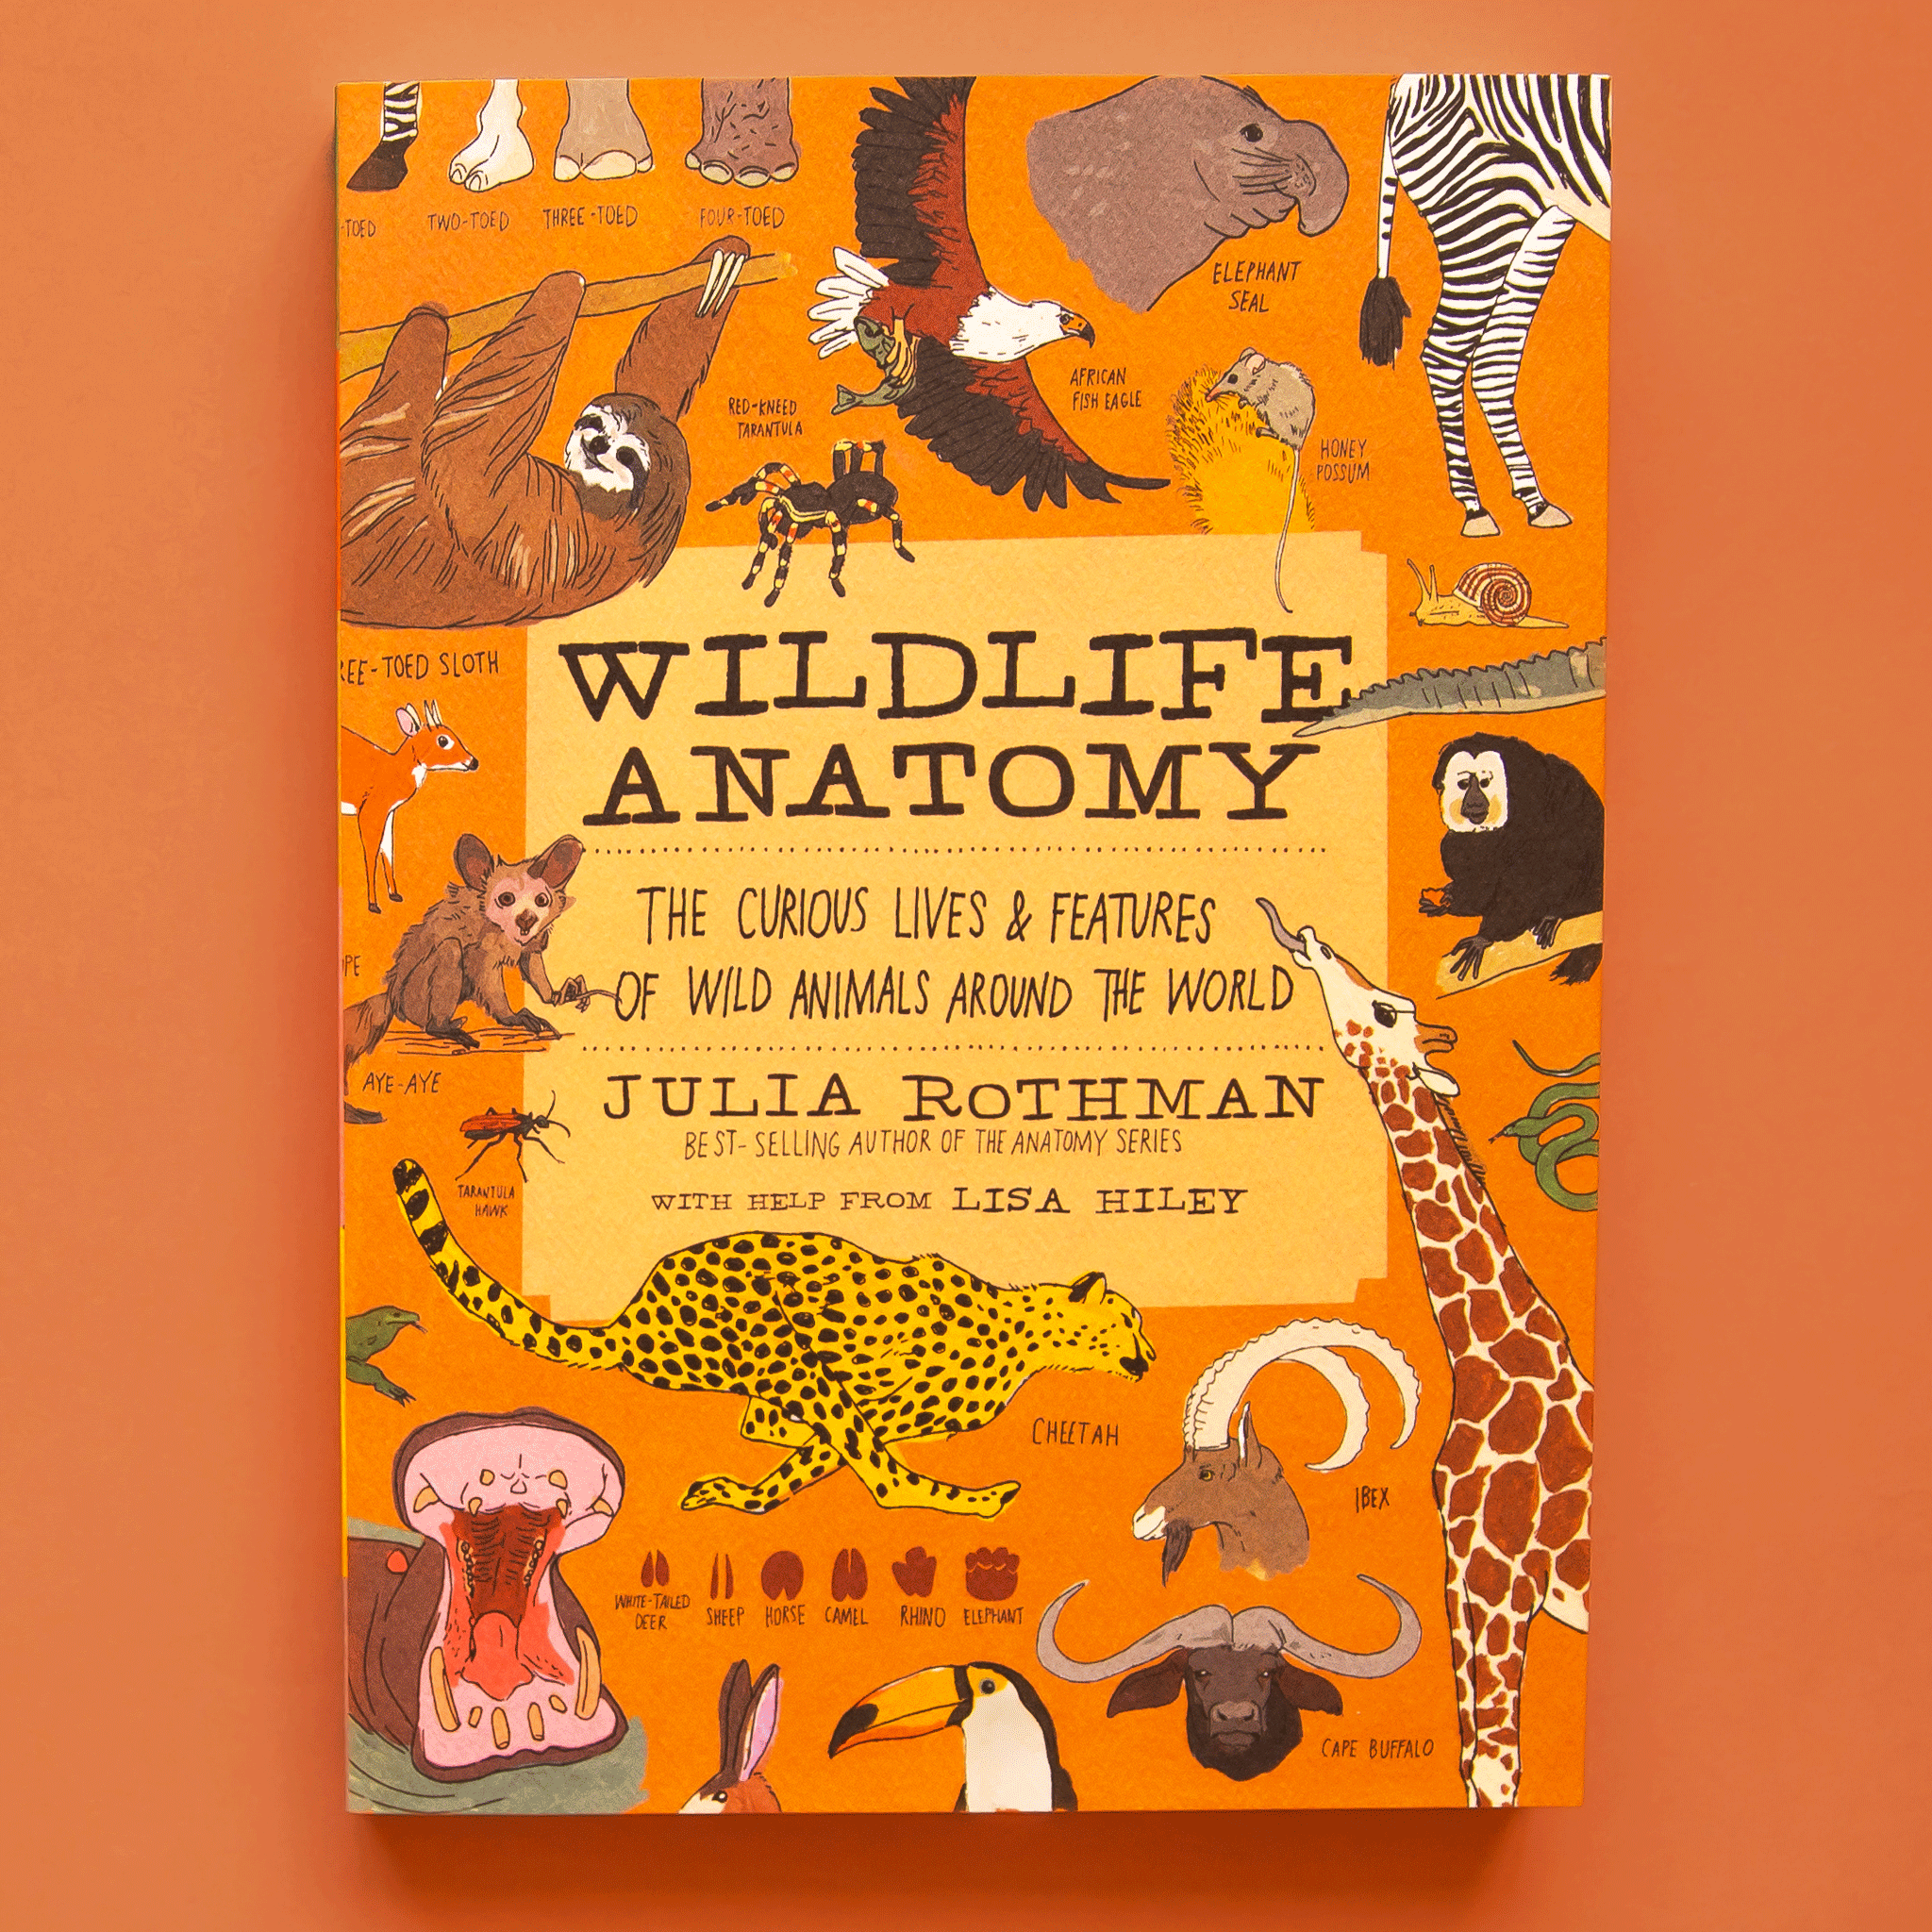 On an orange background is an orange book with a variety of animals on the front and a title that reads, "Wildlife Anatomy The Curious Lives & Features Of Wild Animals The World". 